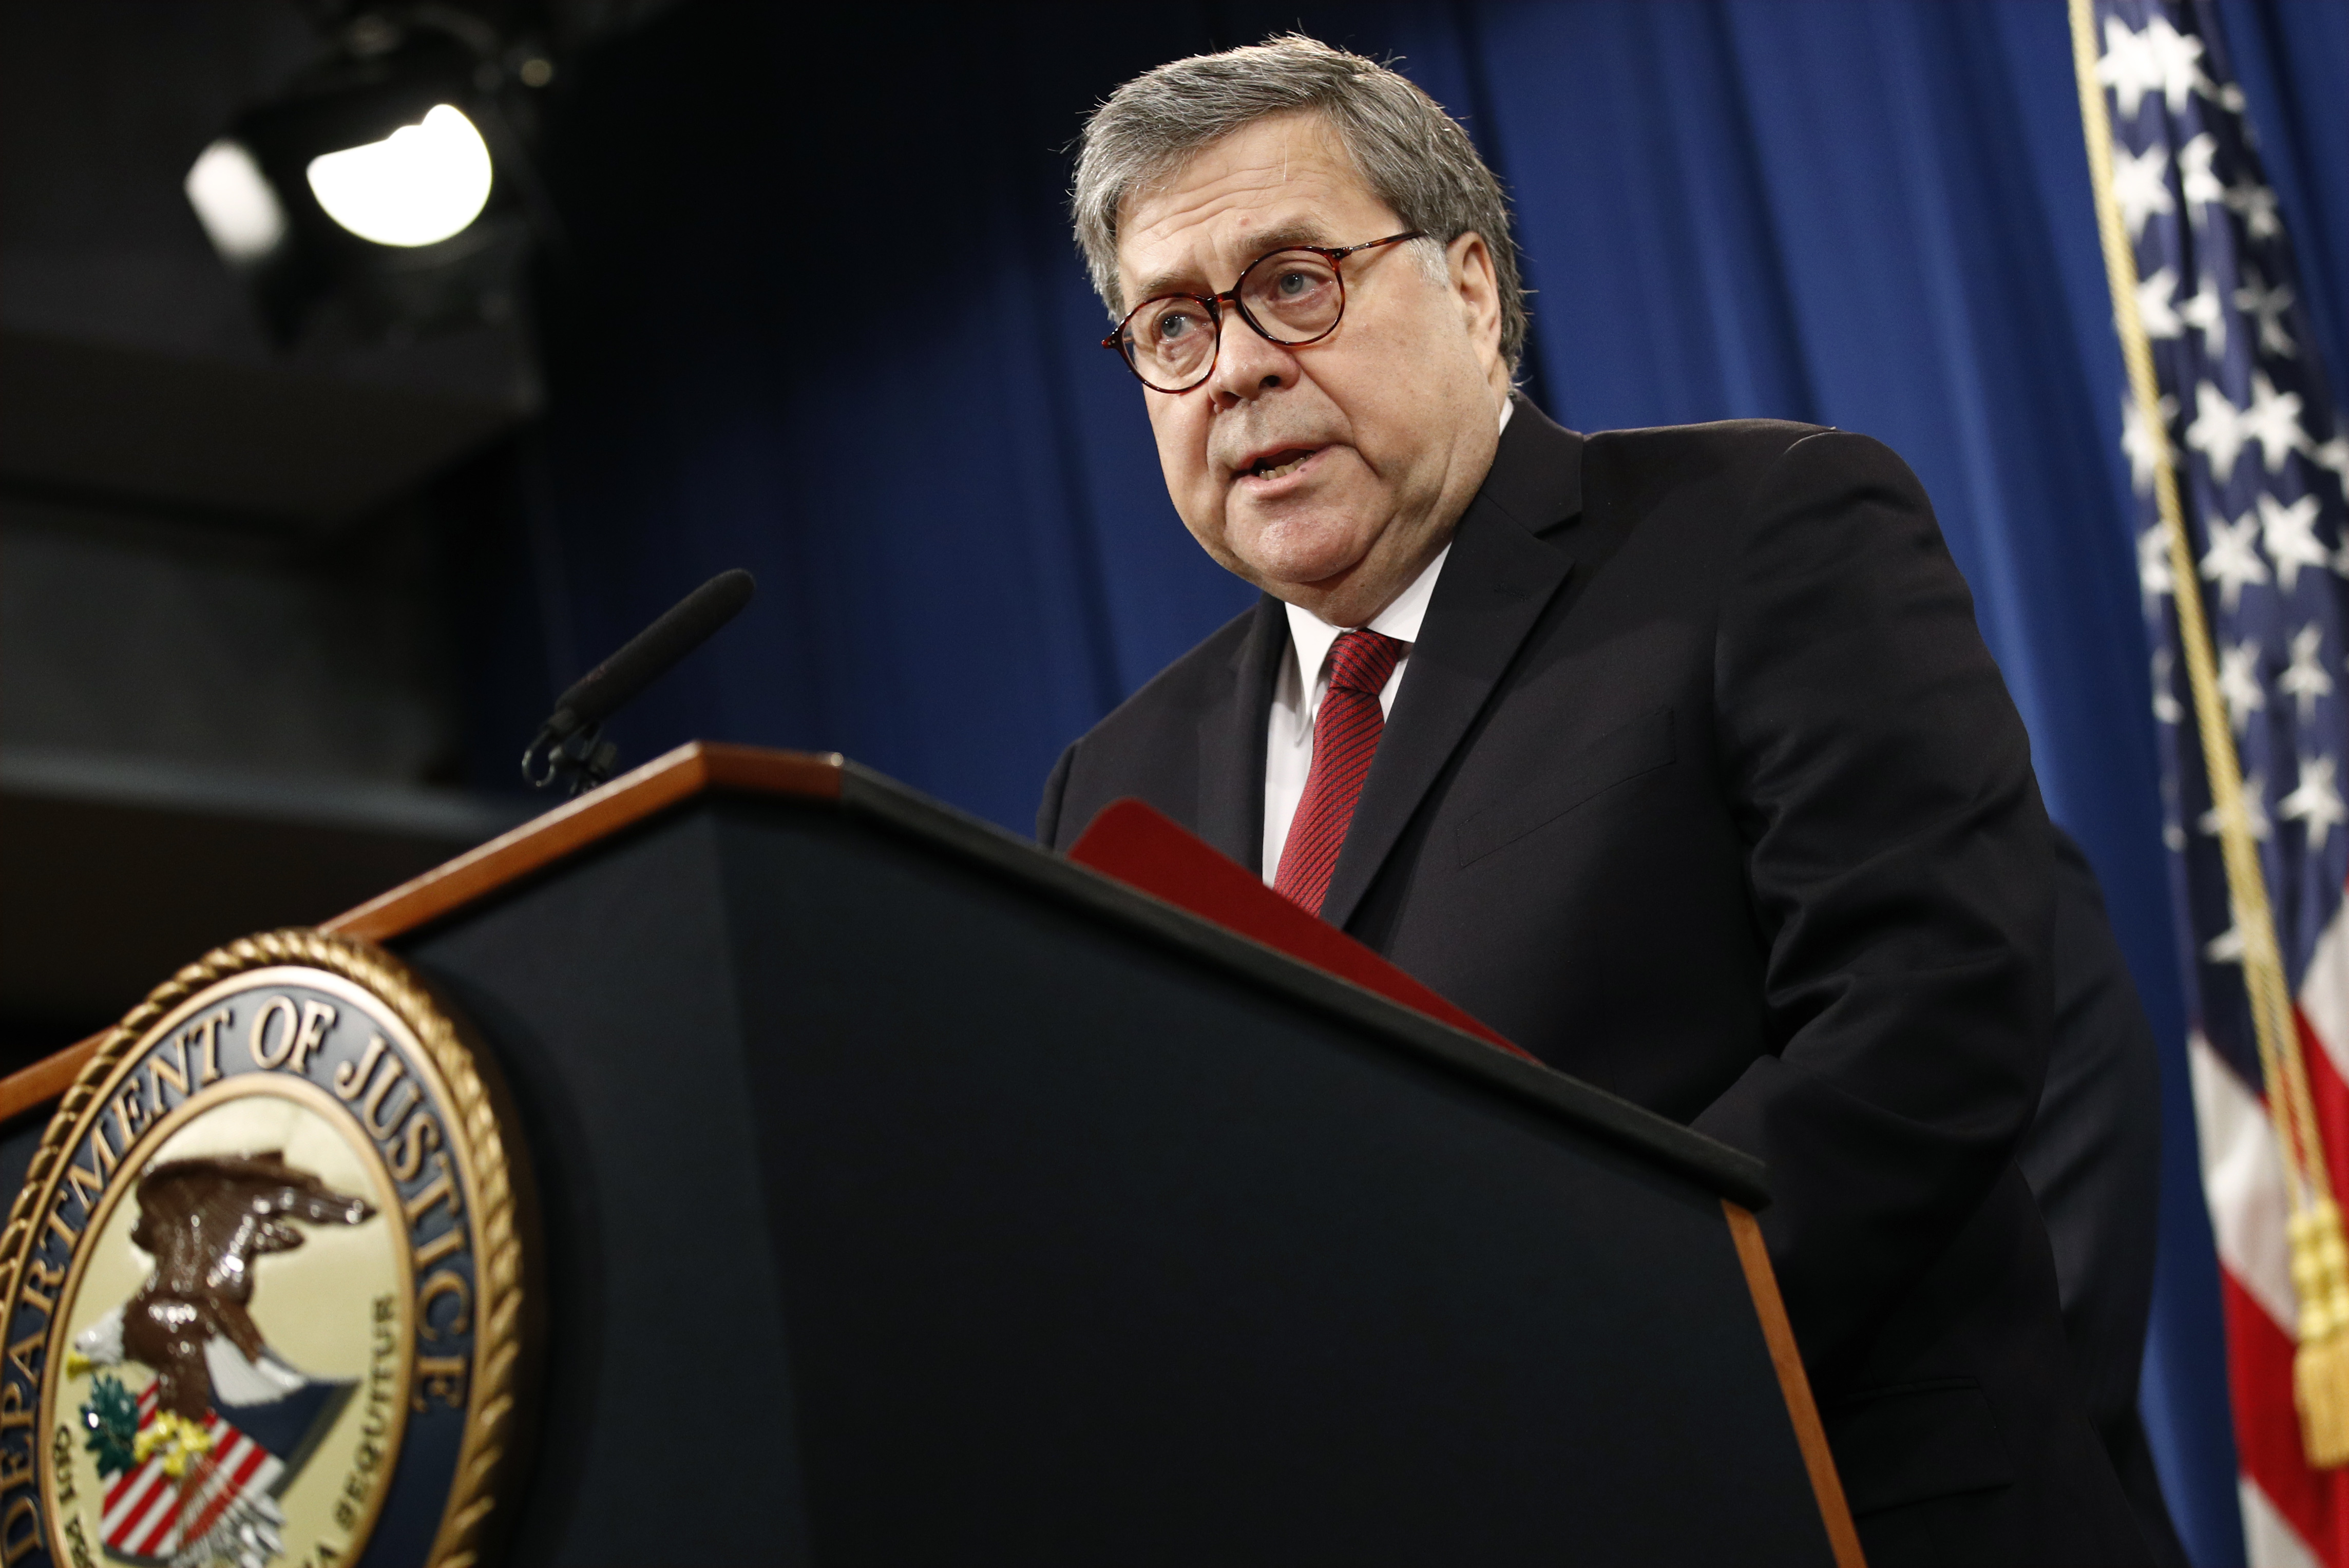 Attorney General William Barr speaks about the release of a redacted version of special counsel Robert Mueller's report during a news conference, Thursday, April 18, 2019, at the Department of Justice in Washington. (Patrick Semansky—AP)